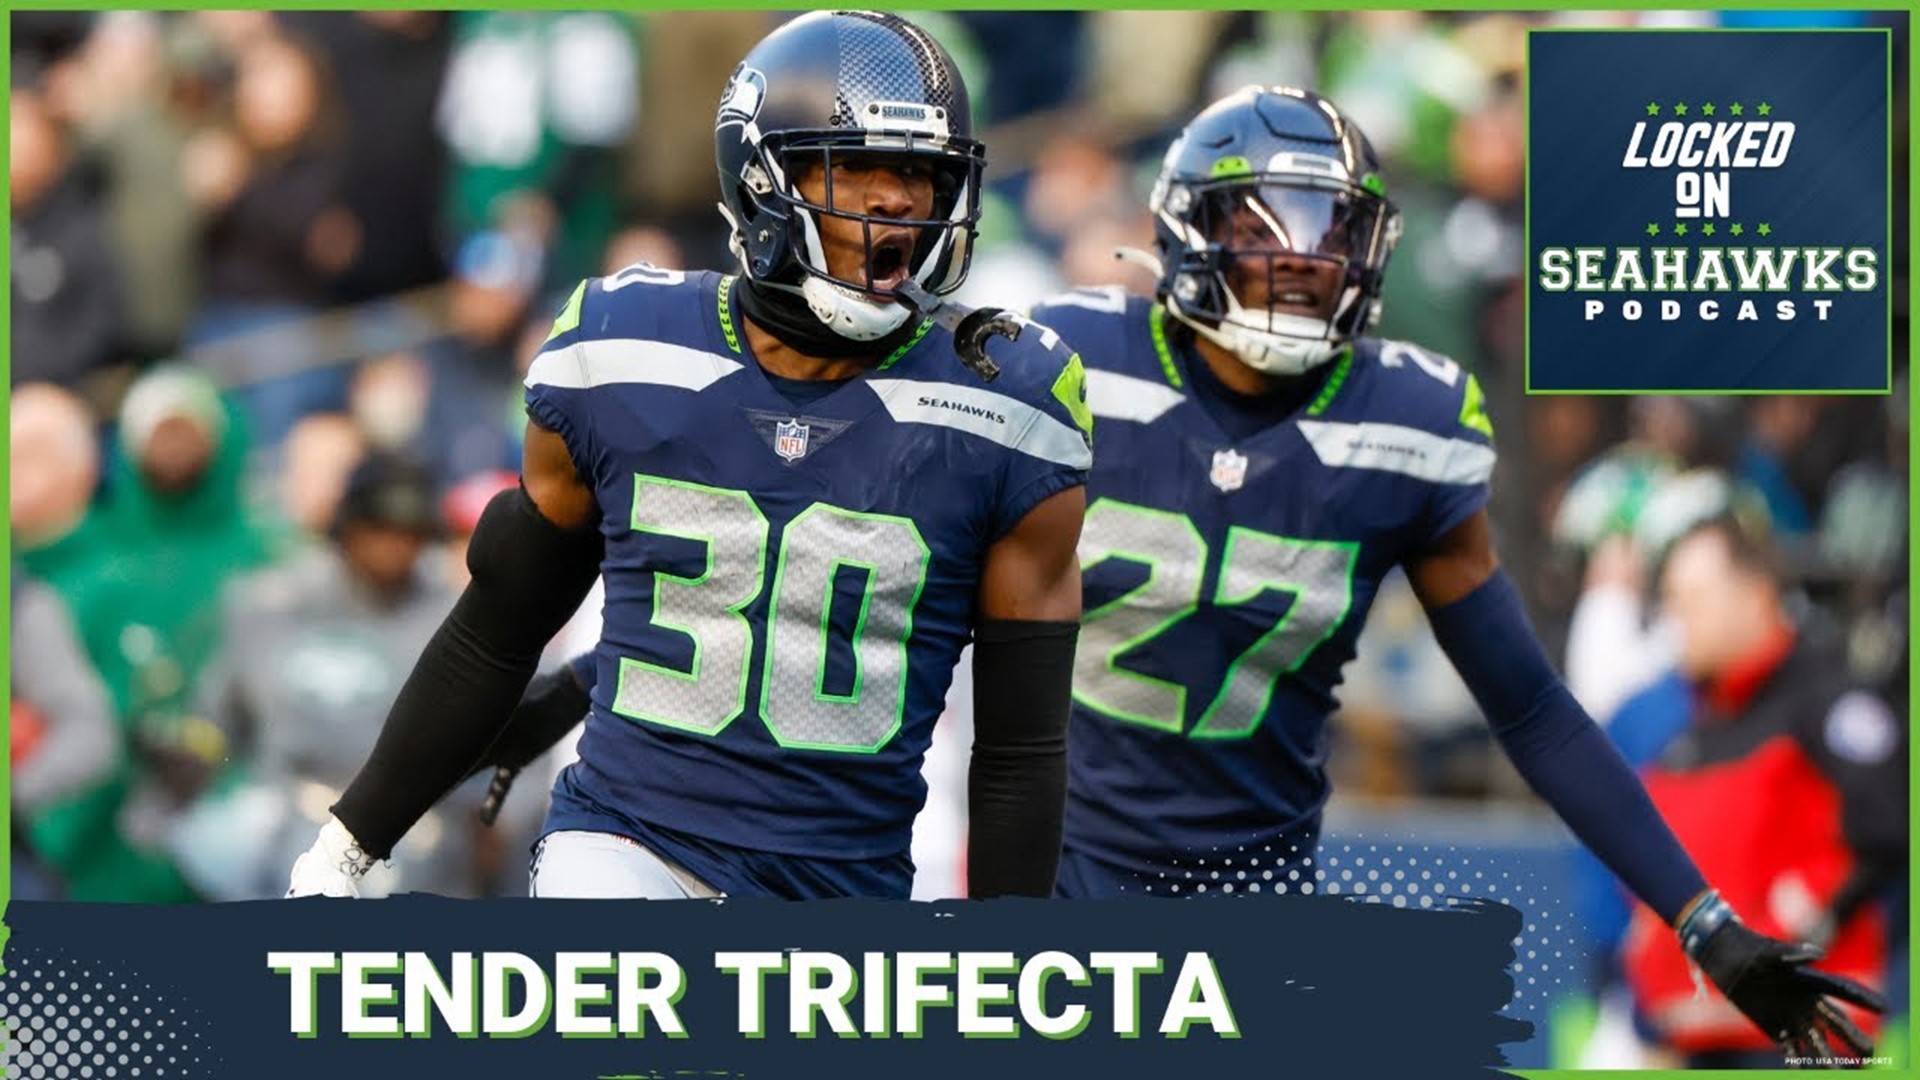 Although the Seahawks didn't add any new players on the first official day of free agency, the front office tendered three exclusive rights free agents.